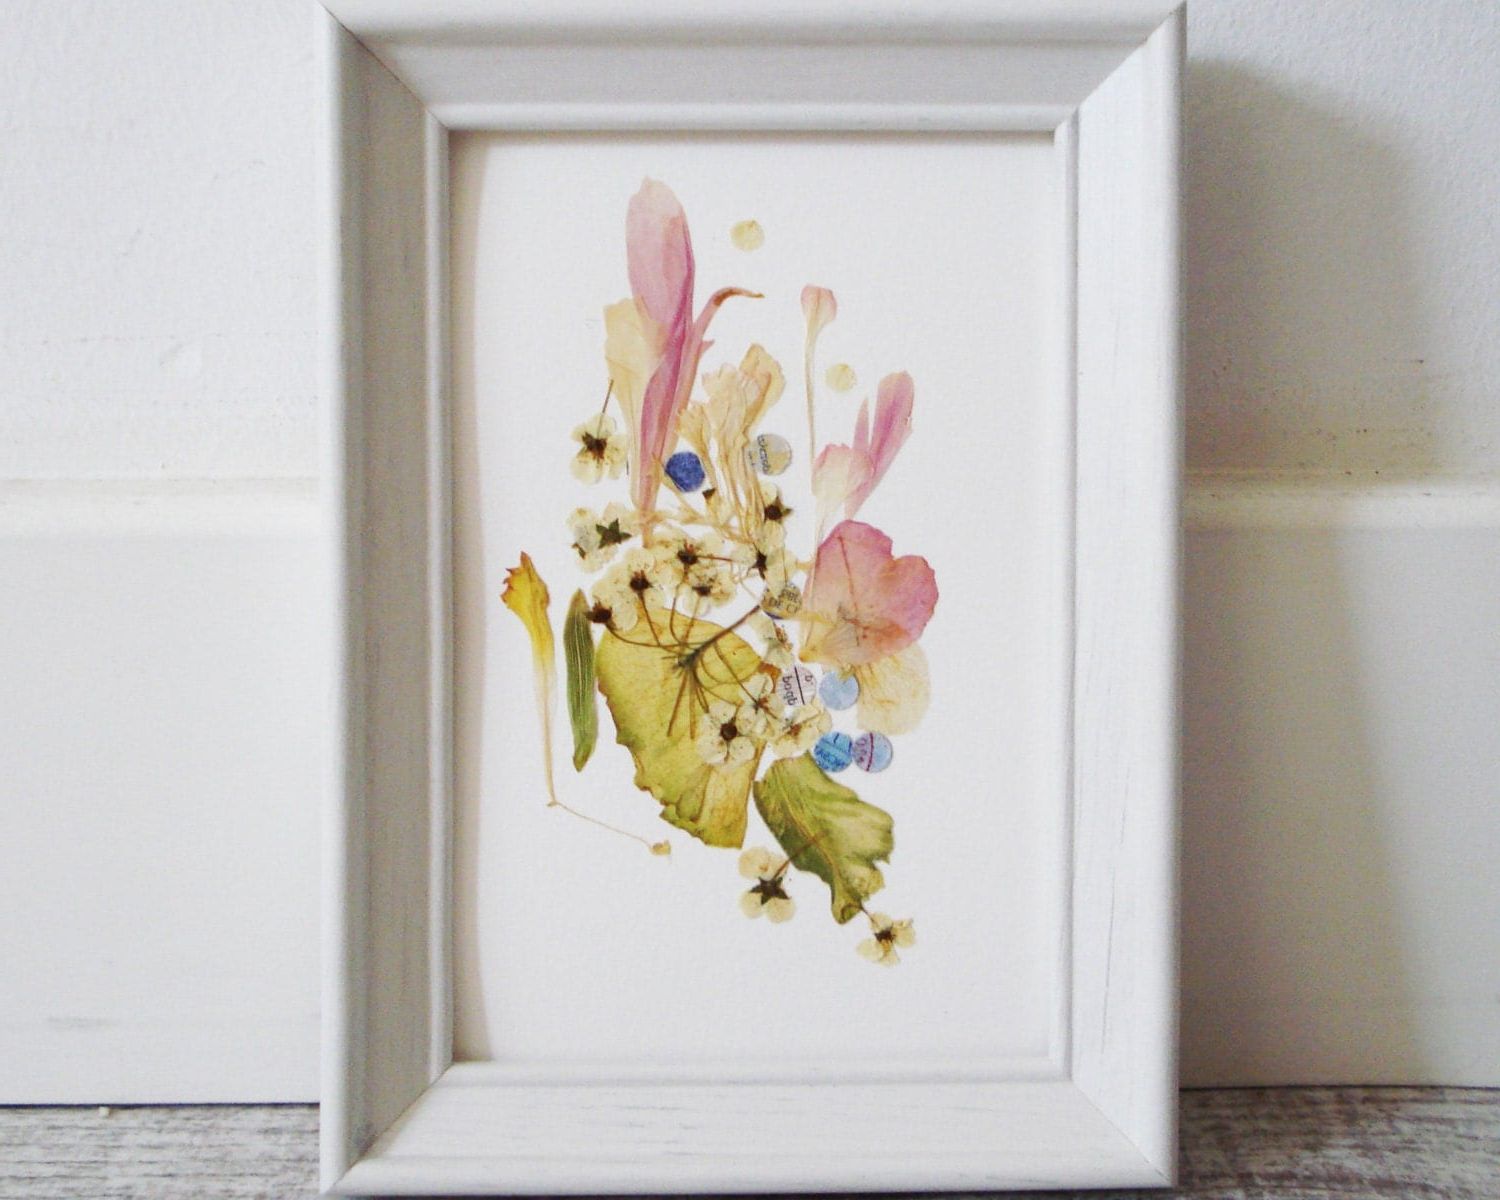 Trendy Pressed Flowers Framed Dried Flowers Framed Art Pressed Pertaining To Flower Framed Art Prints (View 15 of 20)